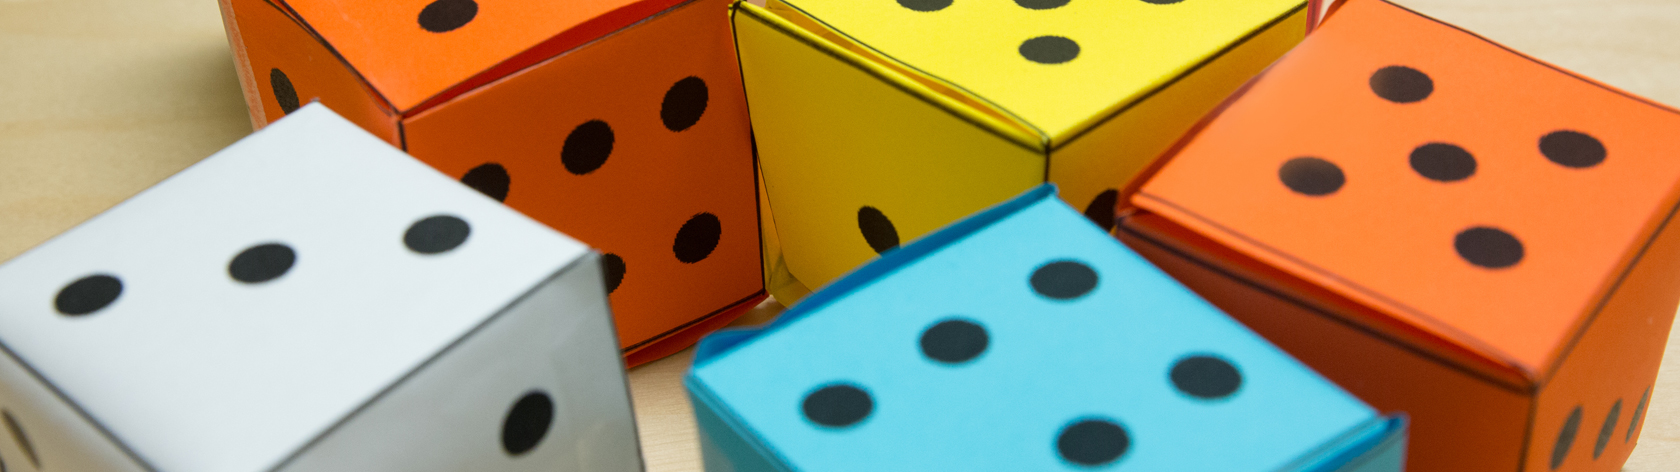 Grouping of big paper dice in different colors